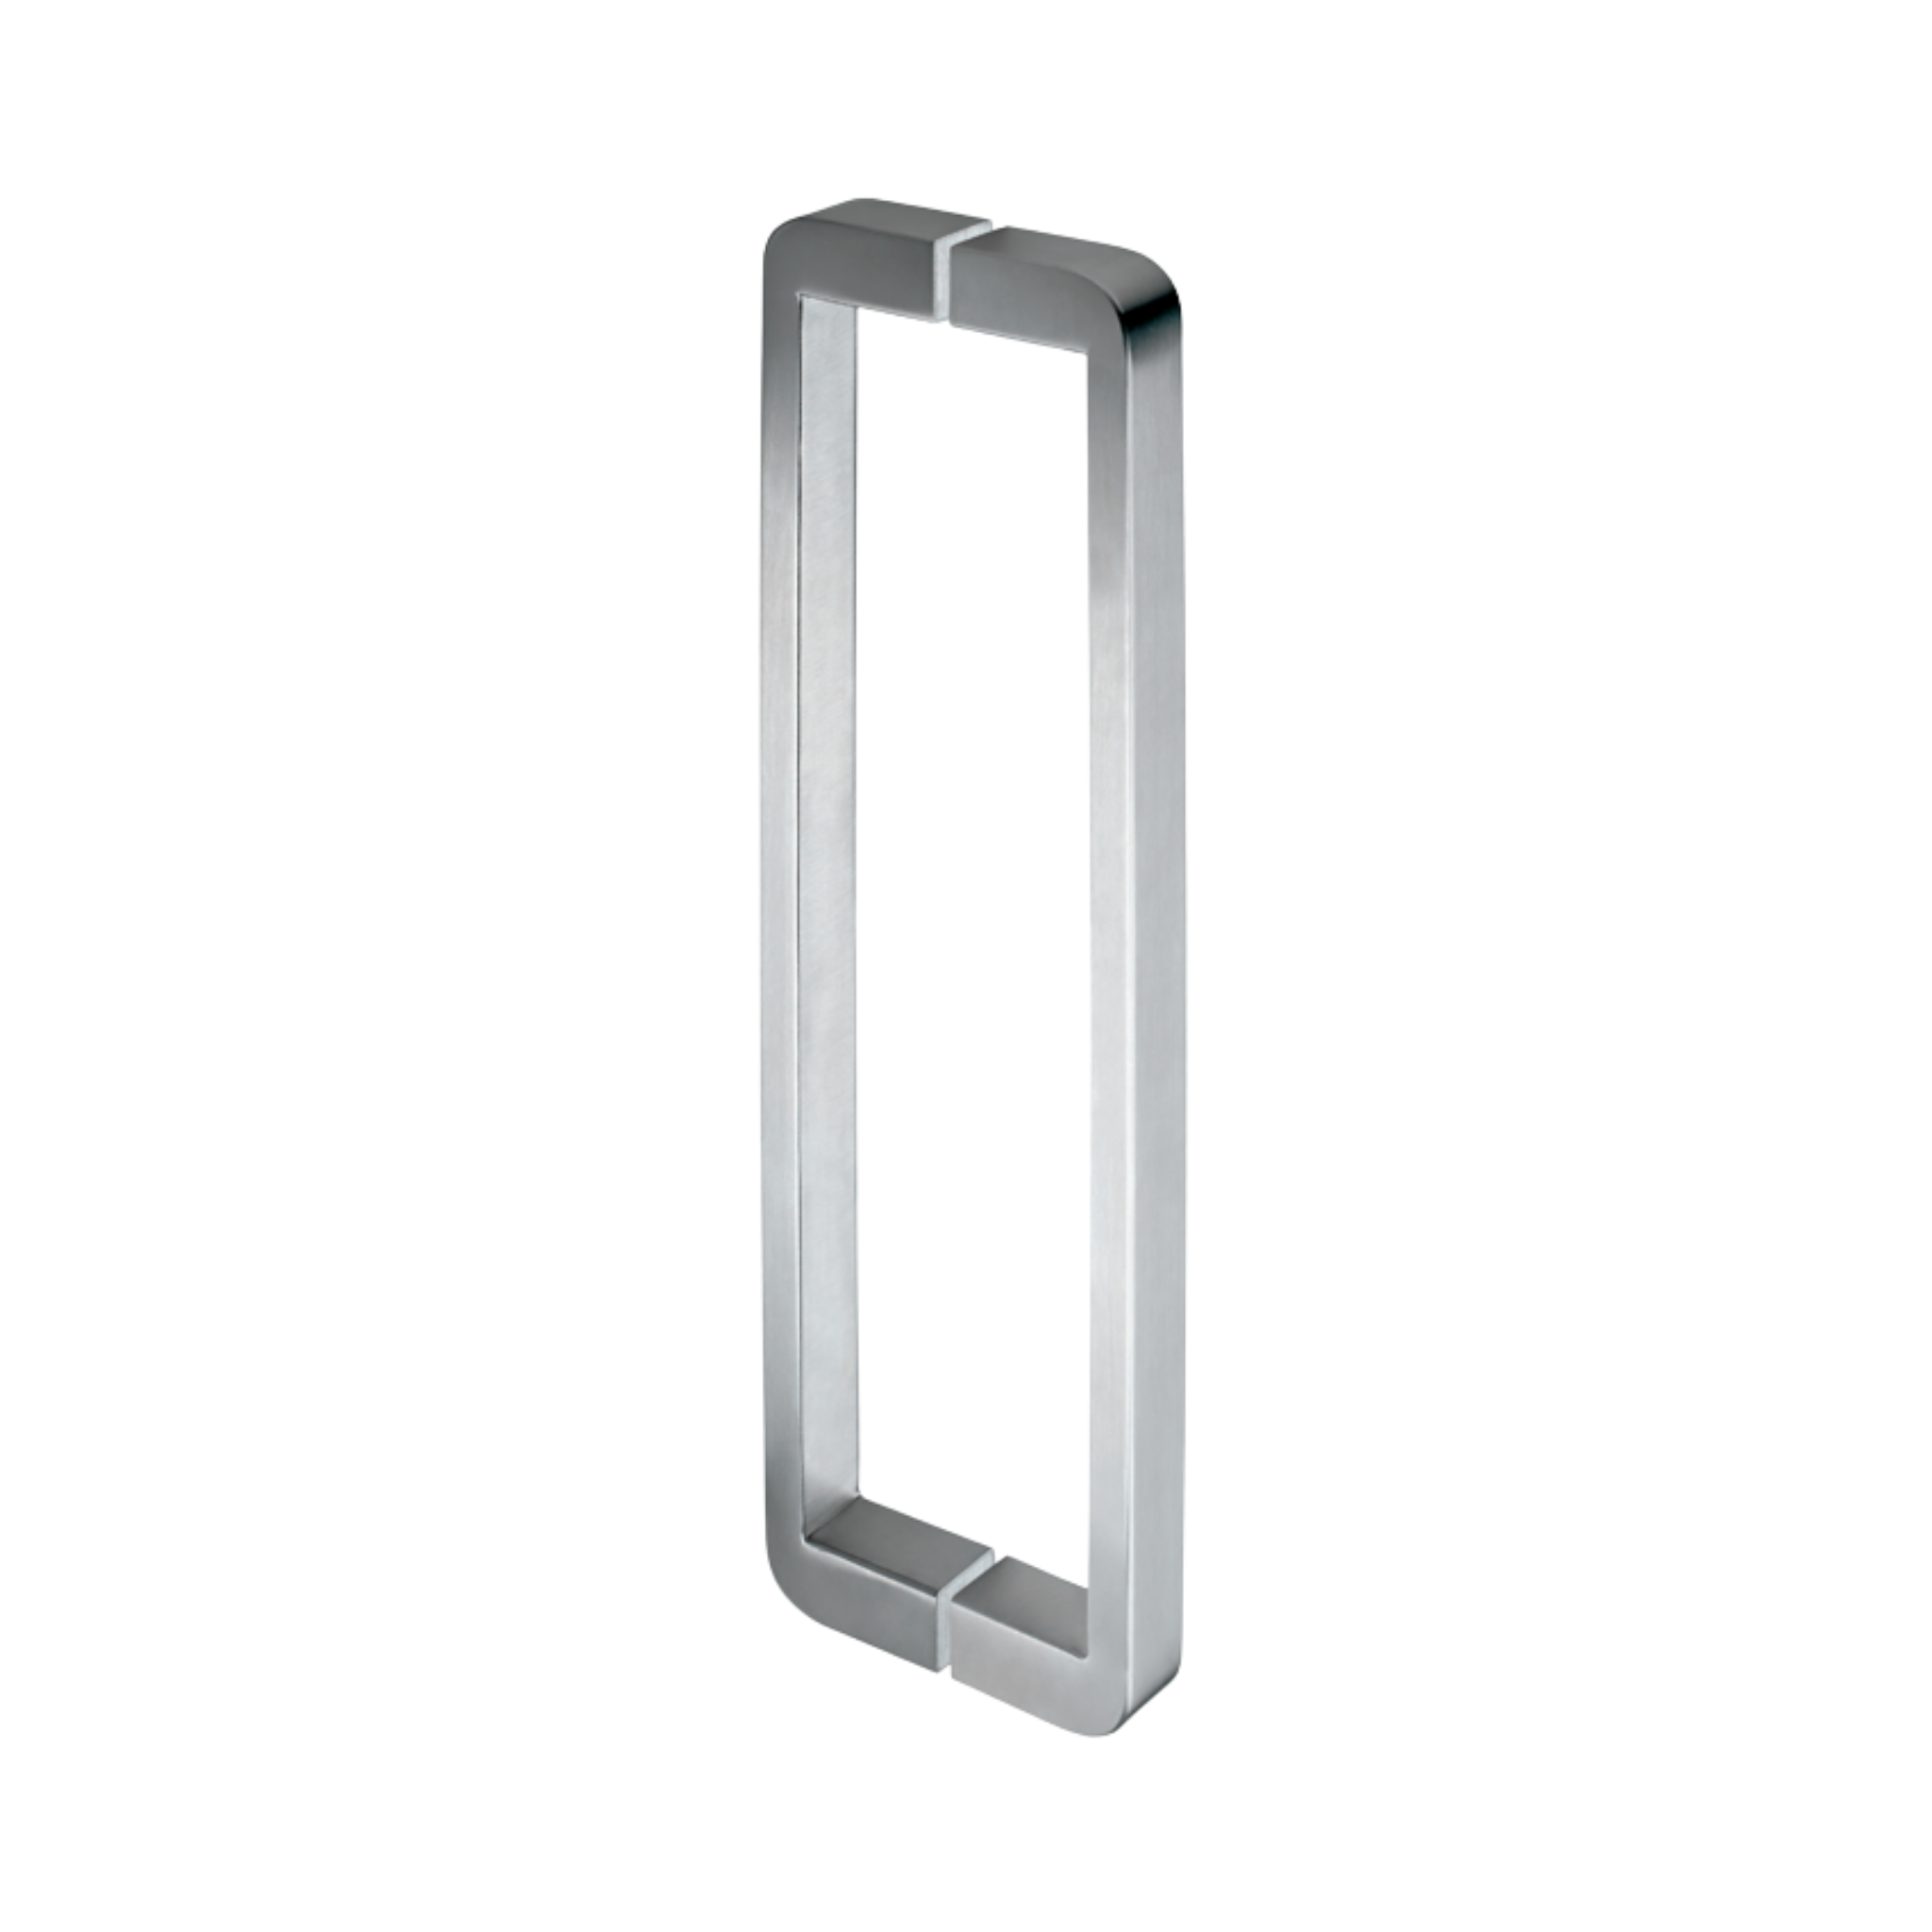 QS2630 Curved Oblong, Pull Handle, Curved, Oblong, BTB, 24x12mm (Ø) x 425mm (l) x 400mm (ctc), Stainless Steel, QS